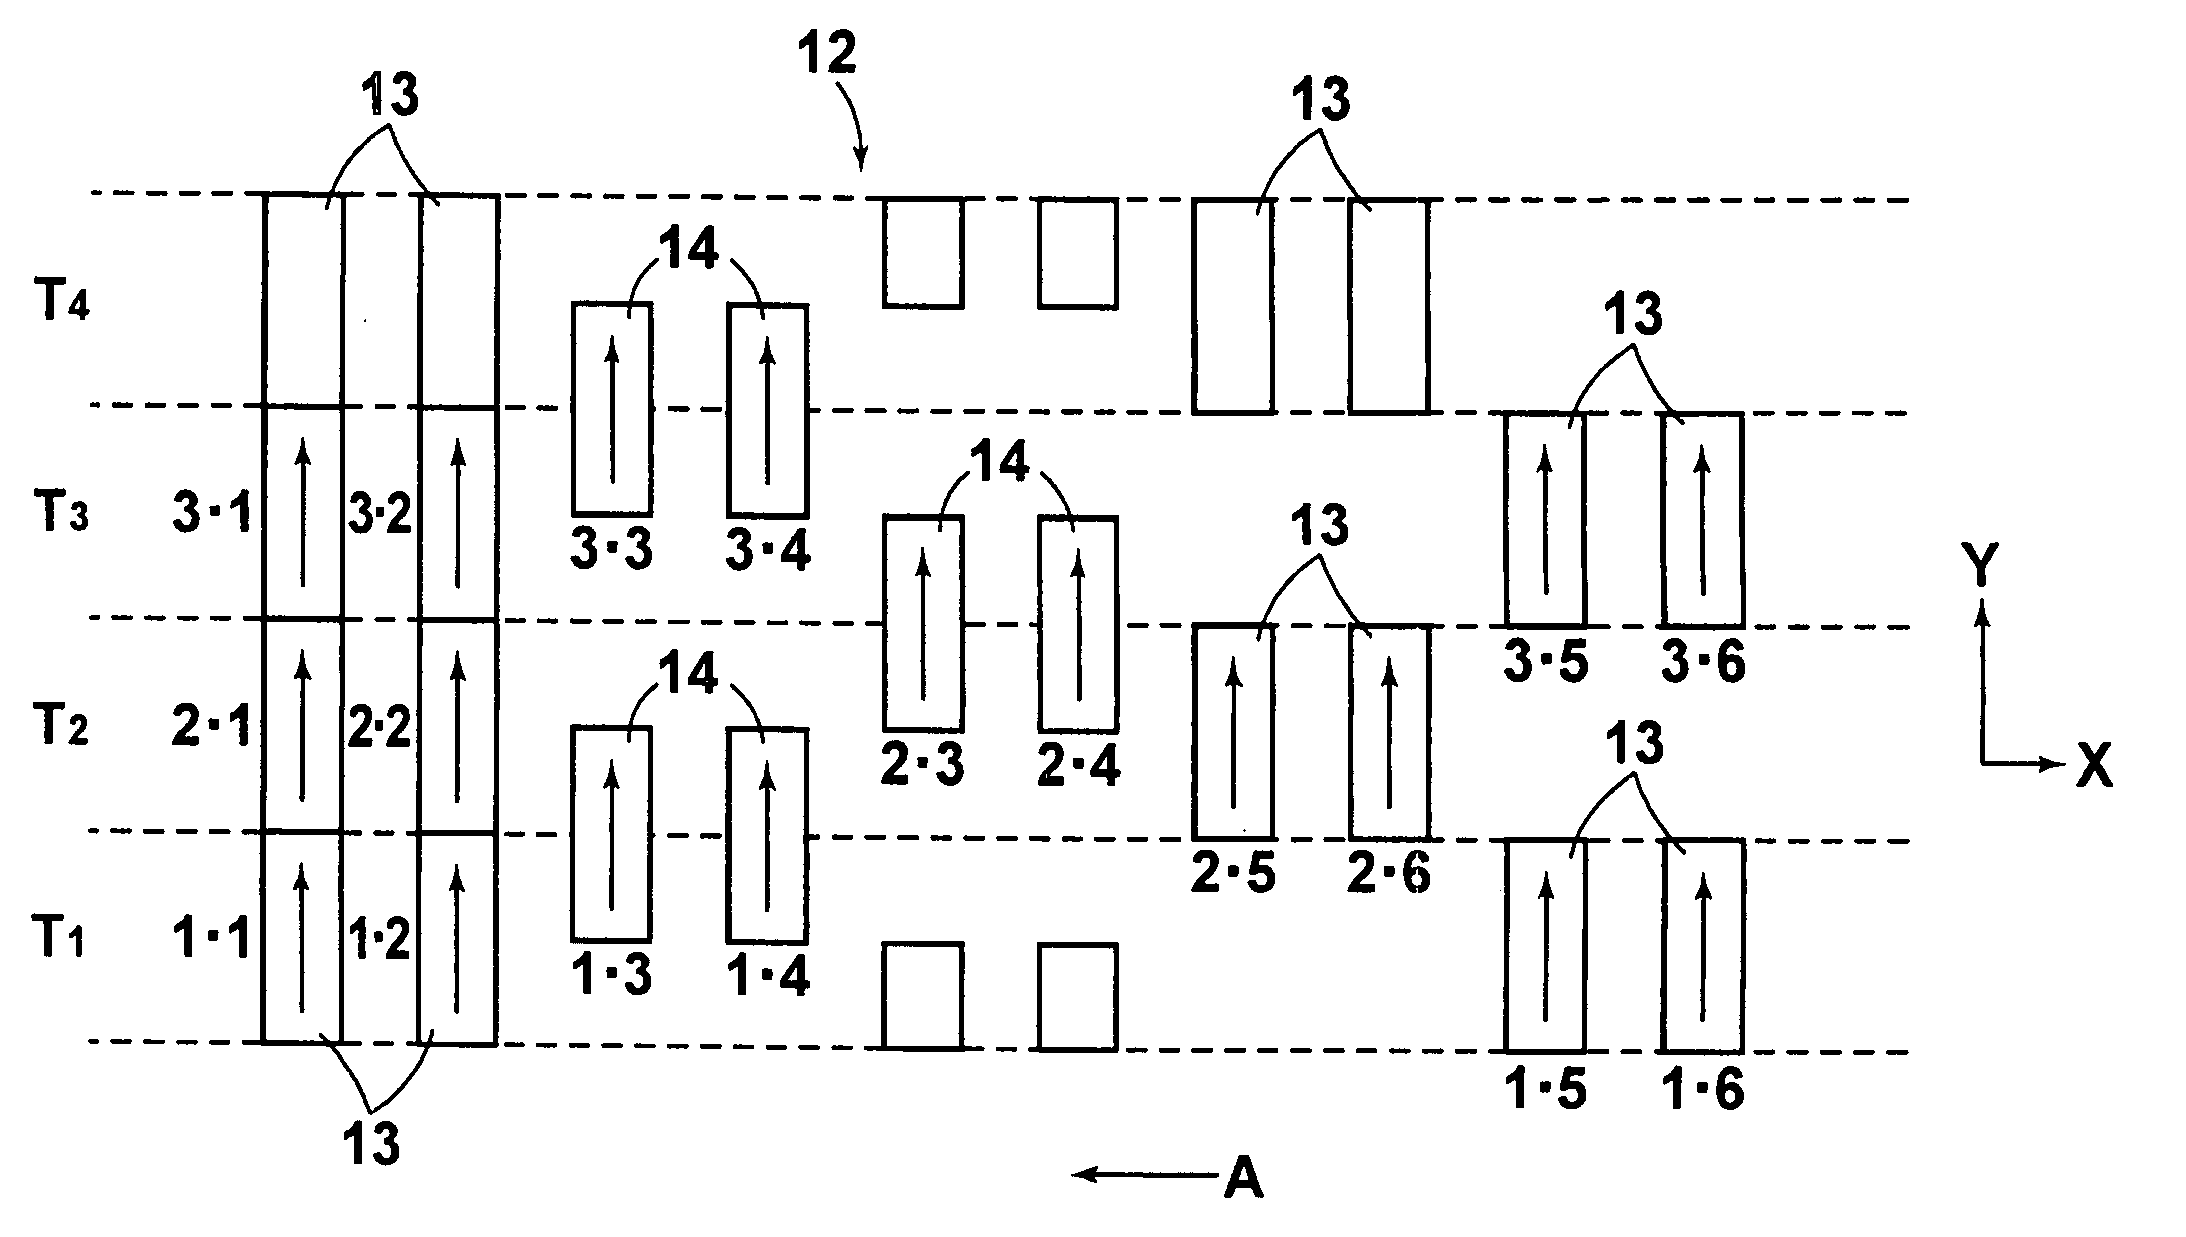 Electron beam lithography method, patterned master carrier for magnetic transfer, lithography method for patterned master carrier for magnetic transfer, and method for producing performatted magnetic recording media